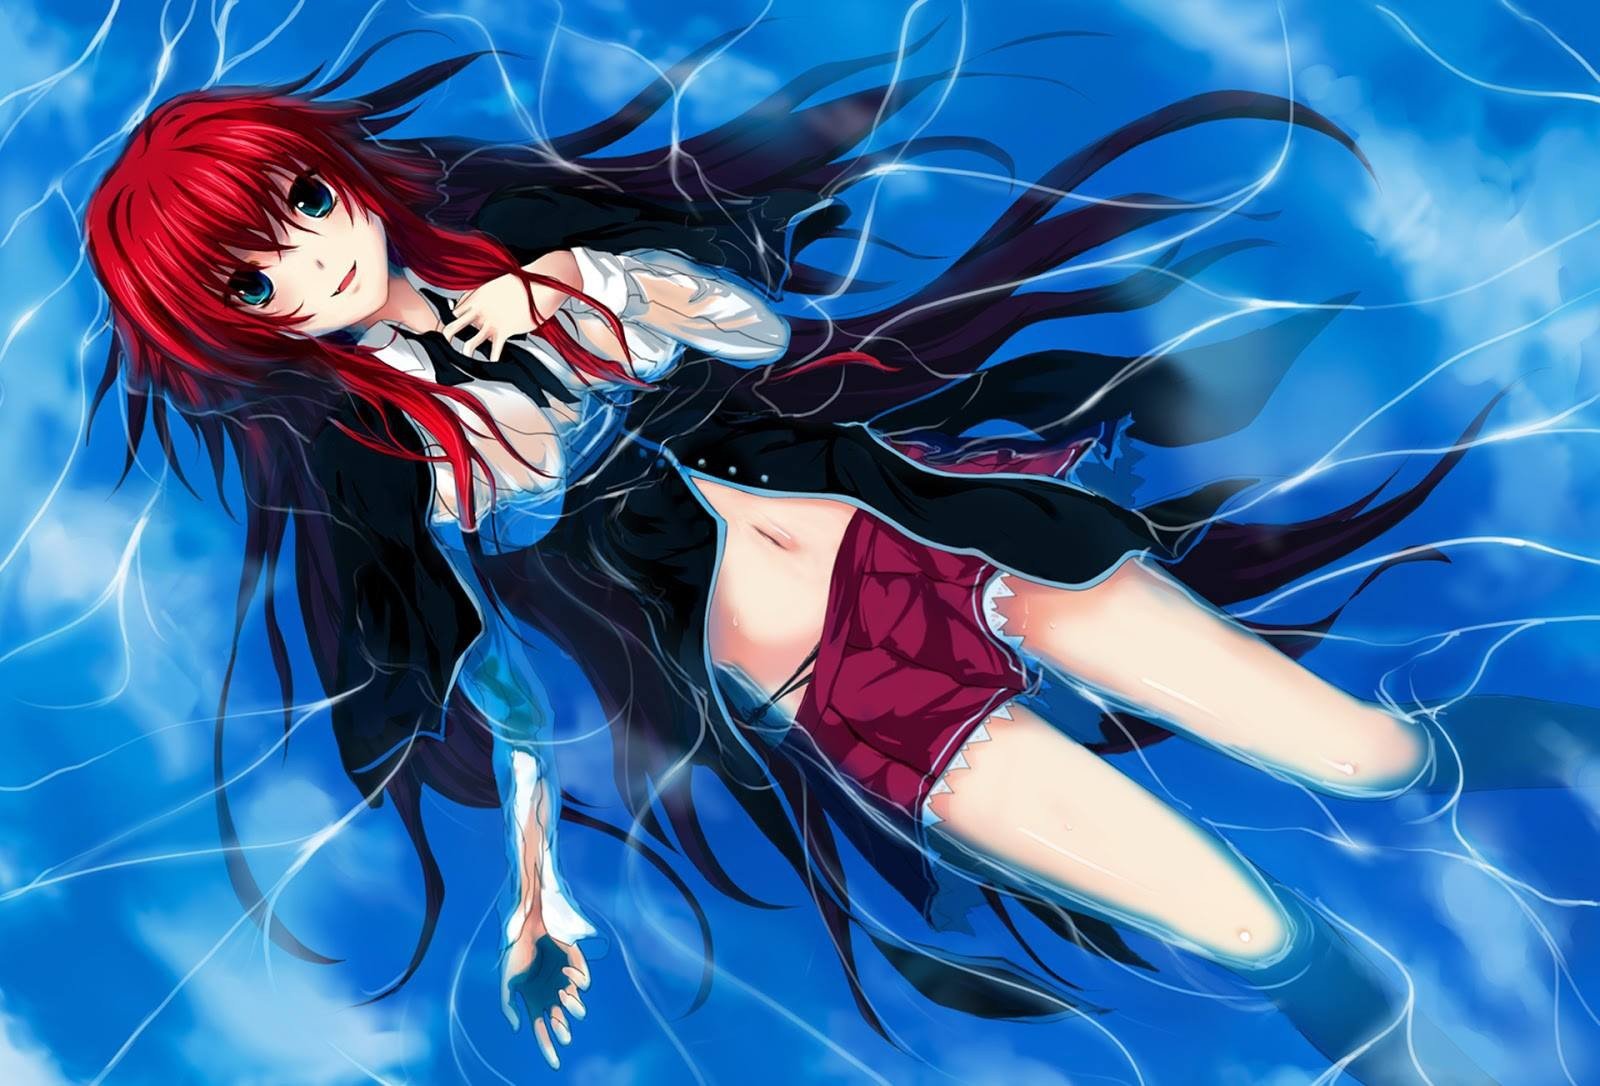 Highschool DxD, Gremory Rias Wallpapers HD / Desktop and Mobile Backgrounds...